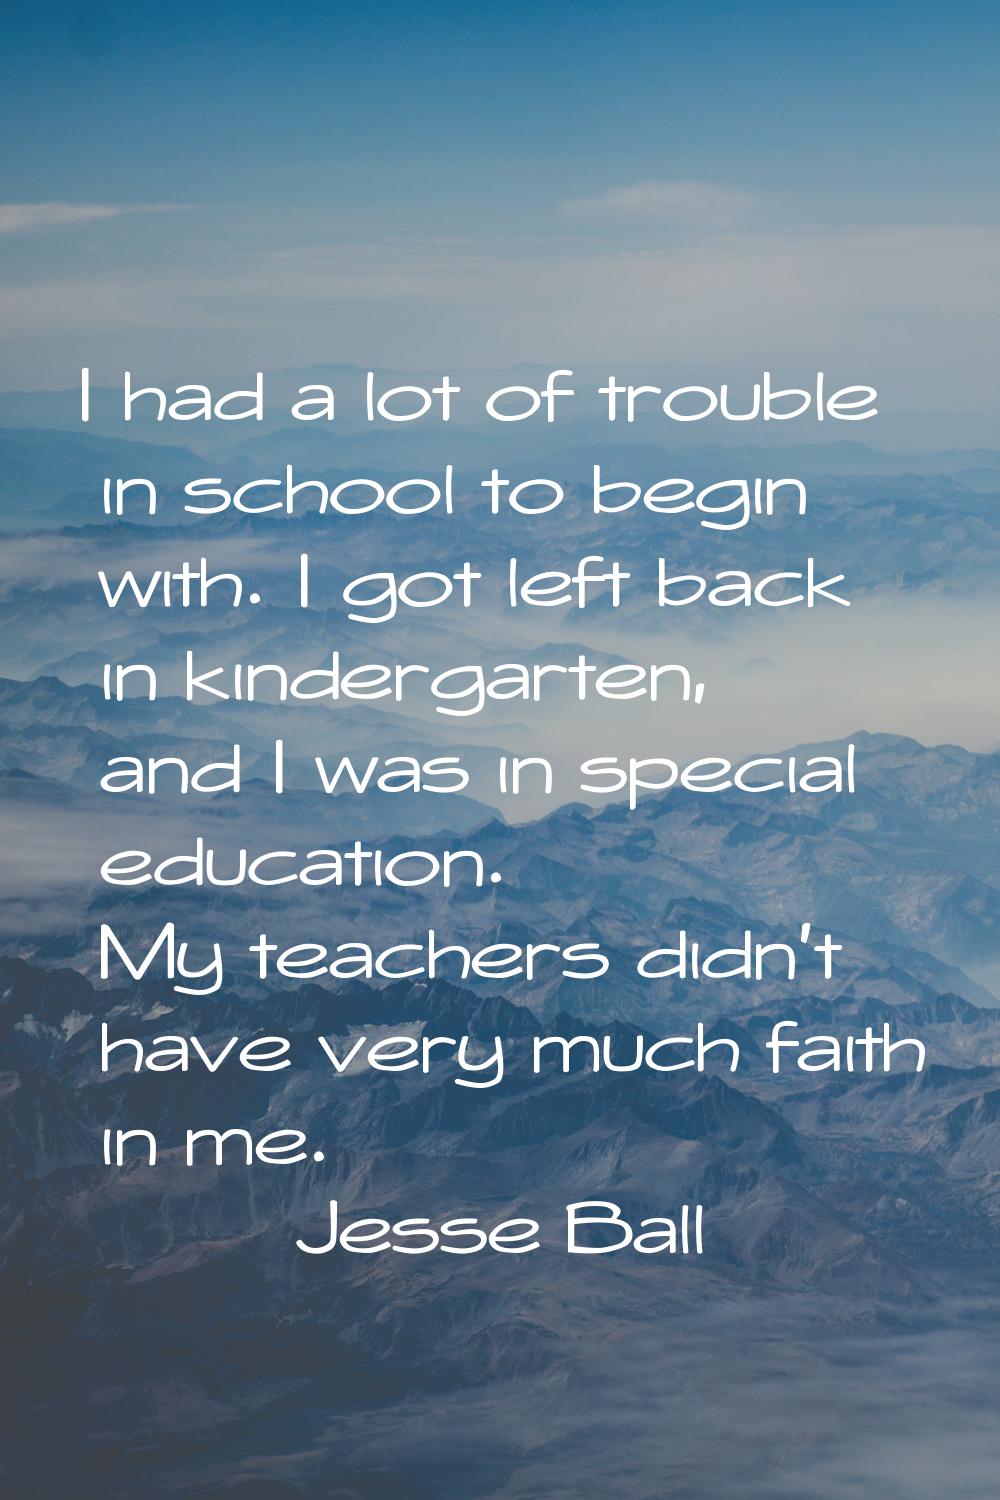 I had a lot of trouble in school to begin with. I got left back in kindergarten, and I was in speci